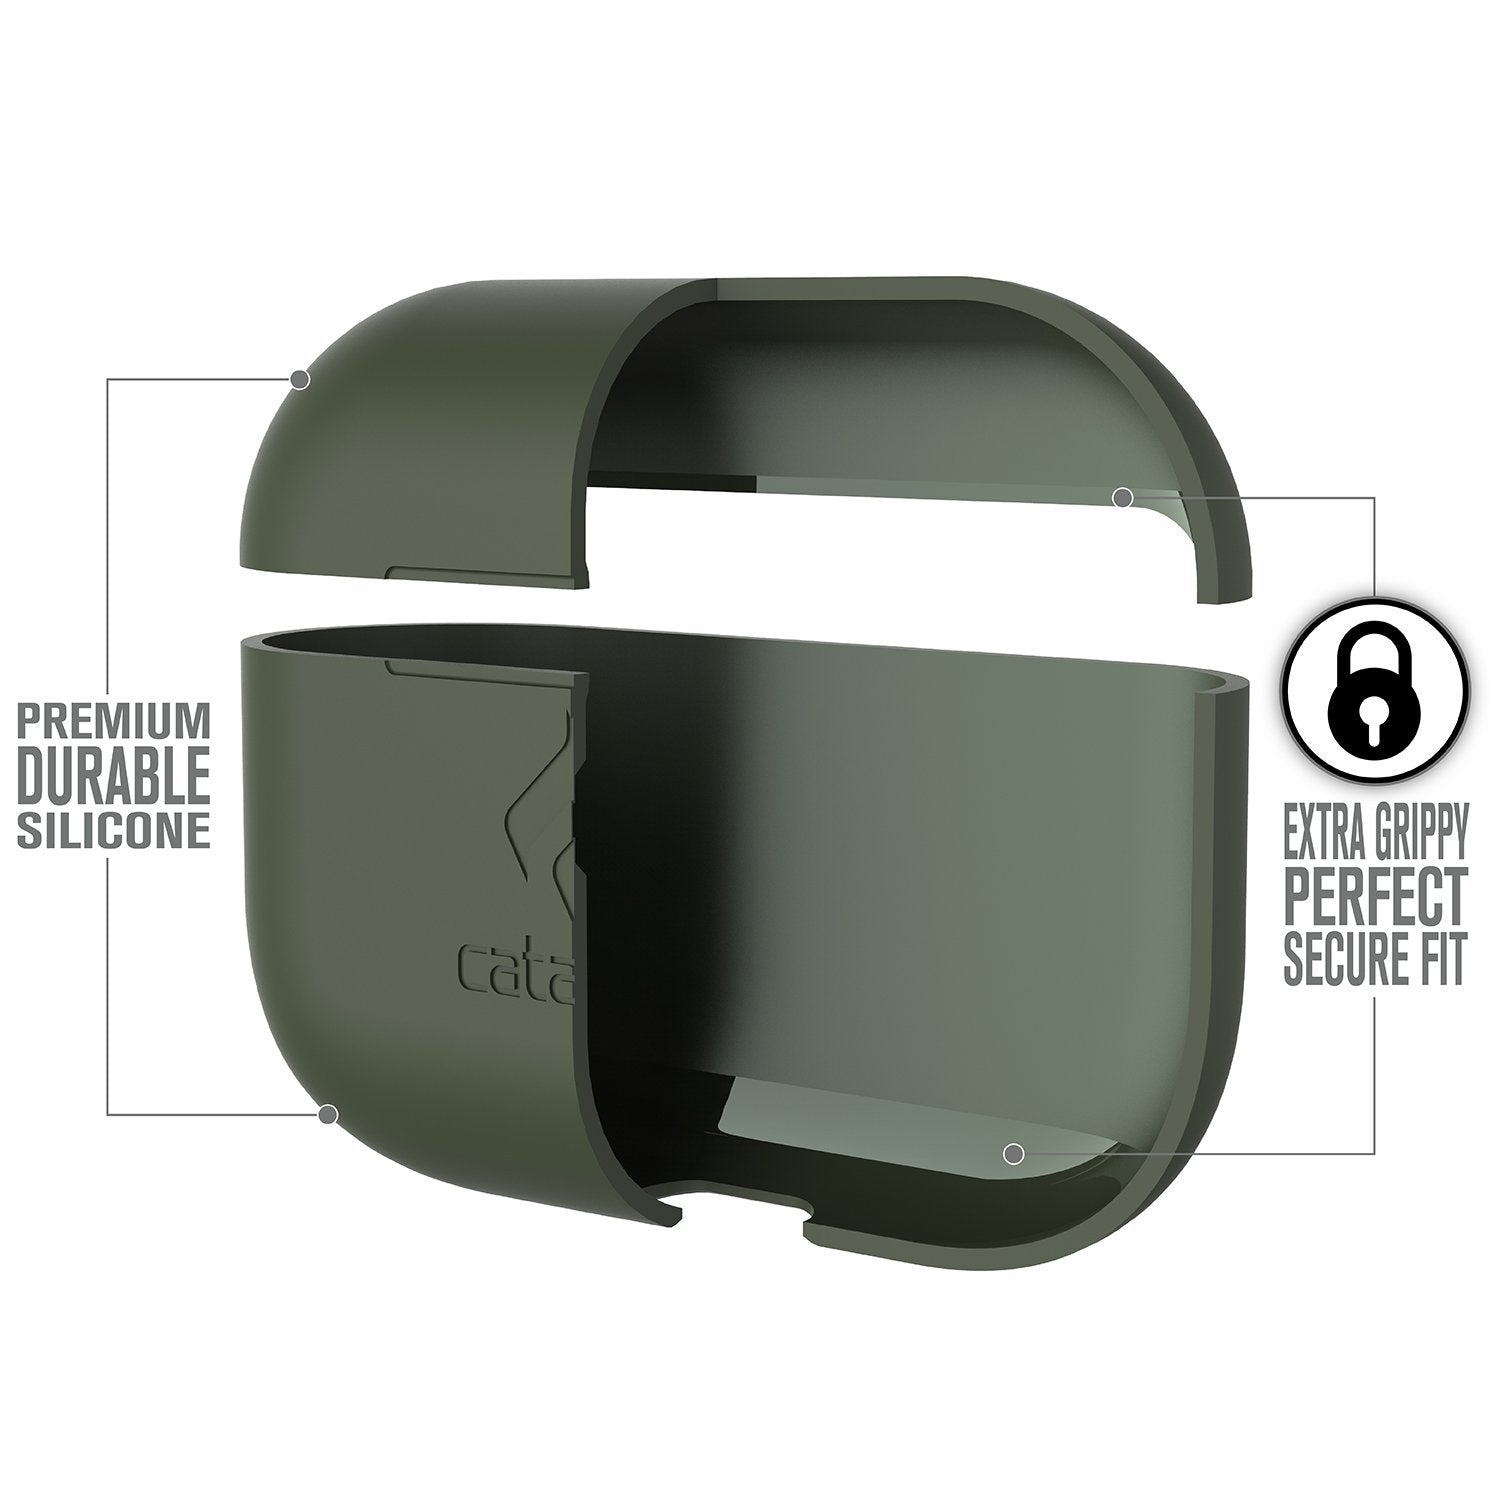 Catalyst airpods pro gen 2/1 slim case showing the case features in an army green colorway text reads premium durable silicone extra grippy perfect secure fit